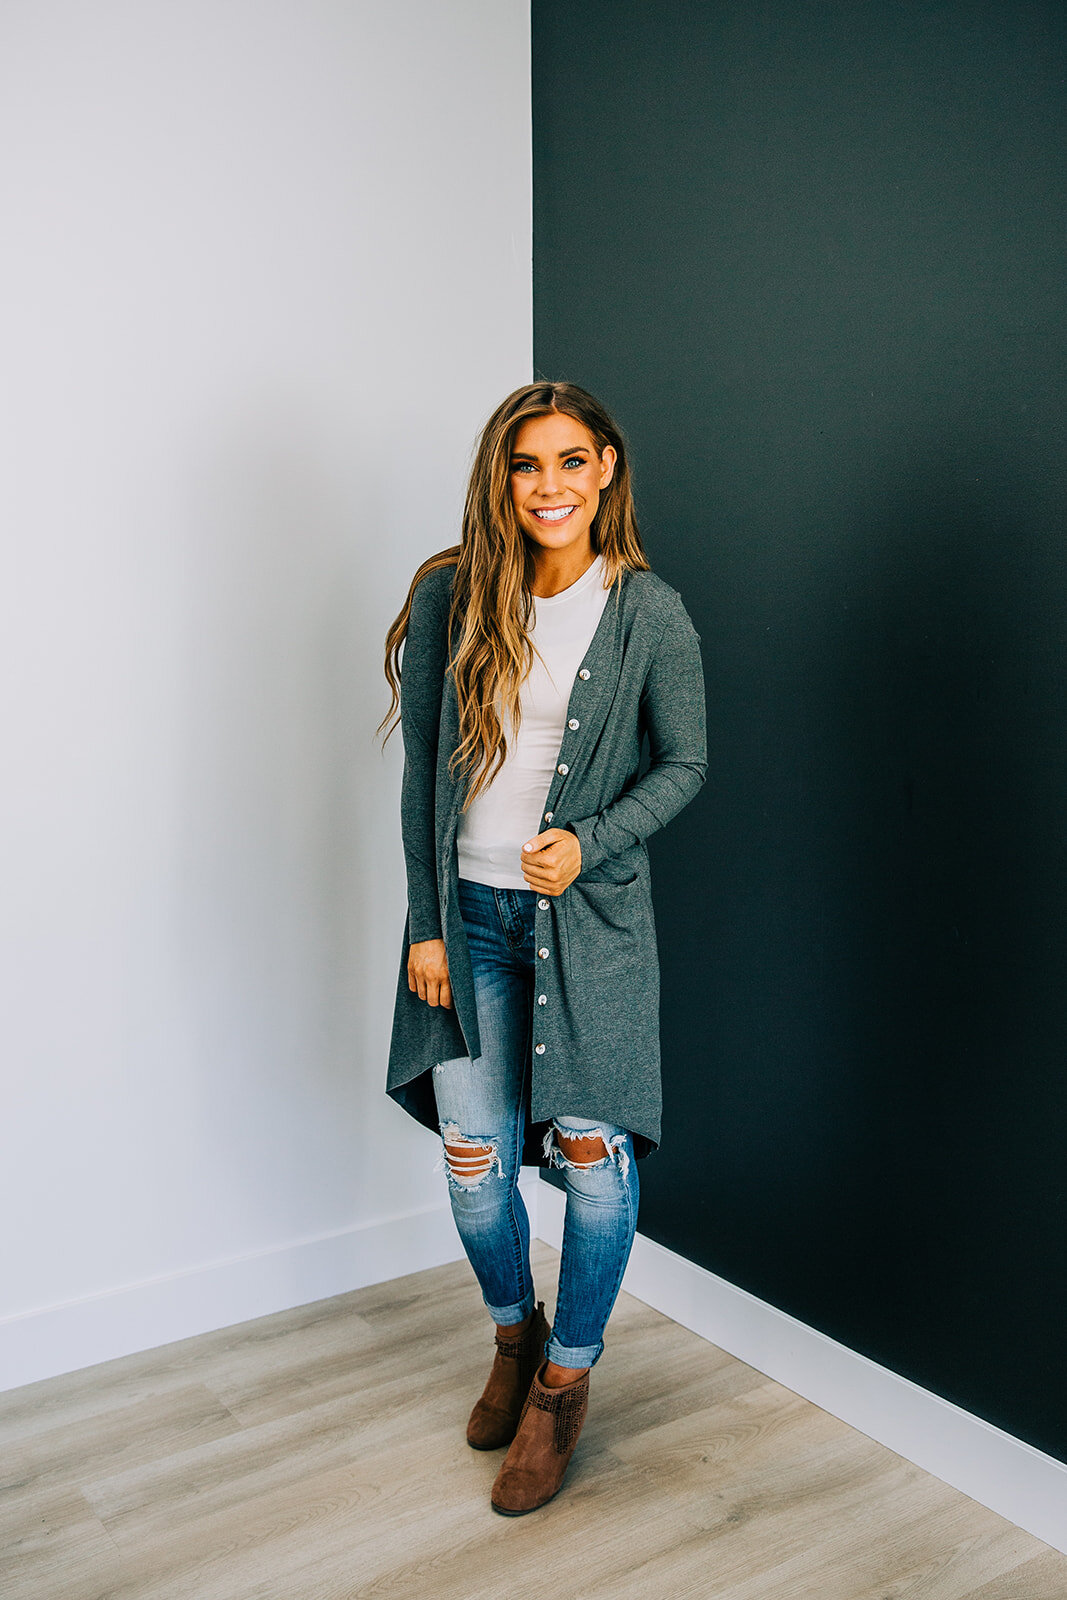  long sleeve extra long cardigan waffle knit green cardigan with white tee underneath and distressed light wash jeans fall outfit ideas for modest clothing boutique bella alder photography professional commercial photographer in logan utah #onlinesho